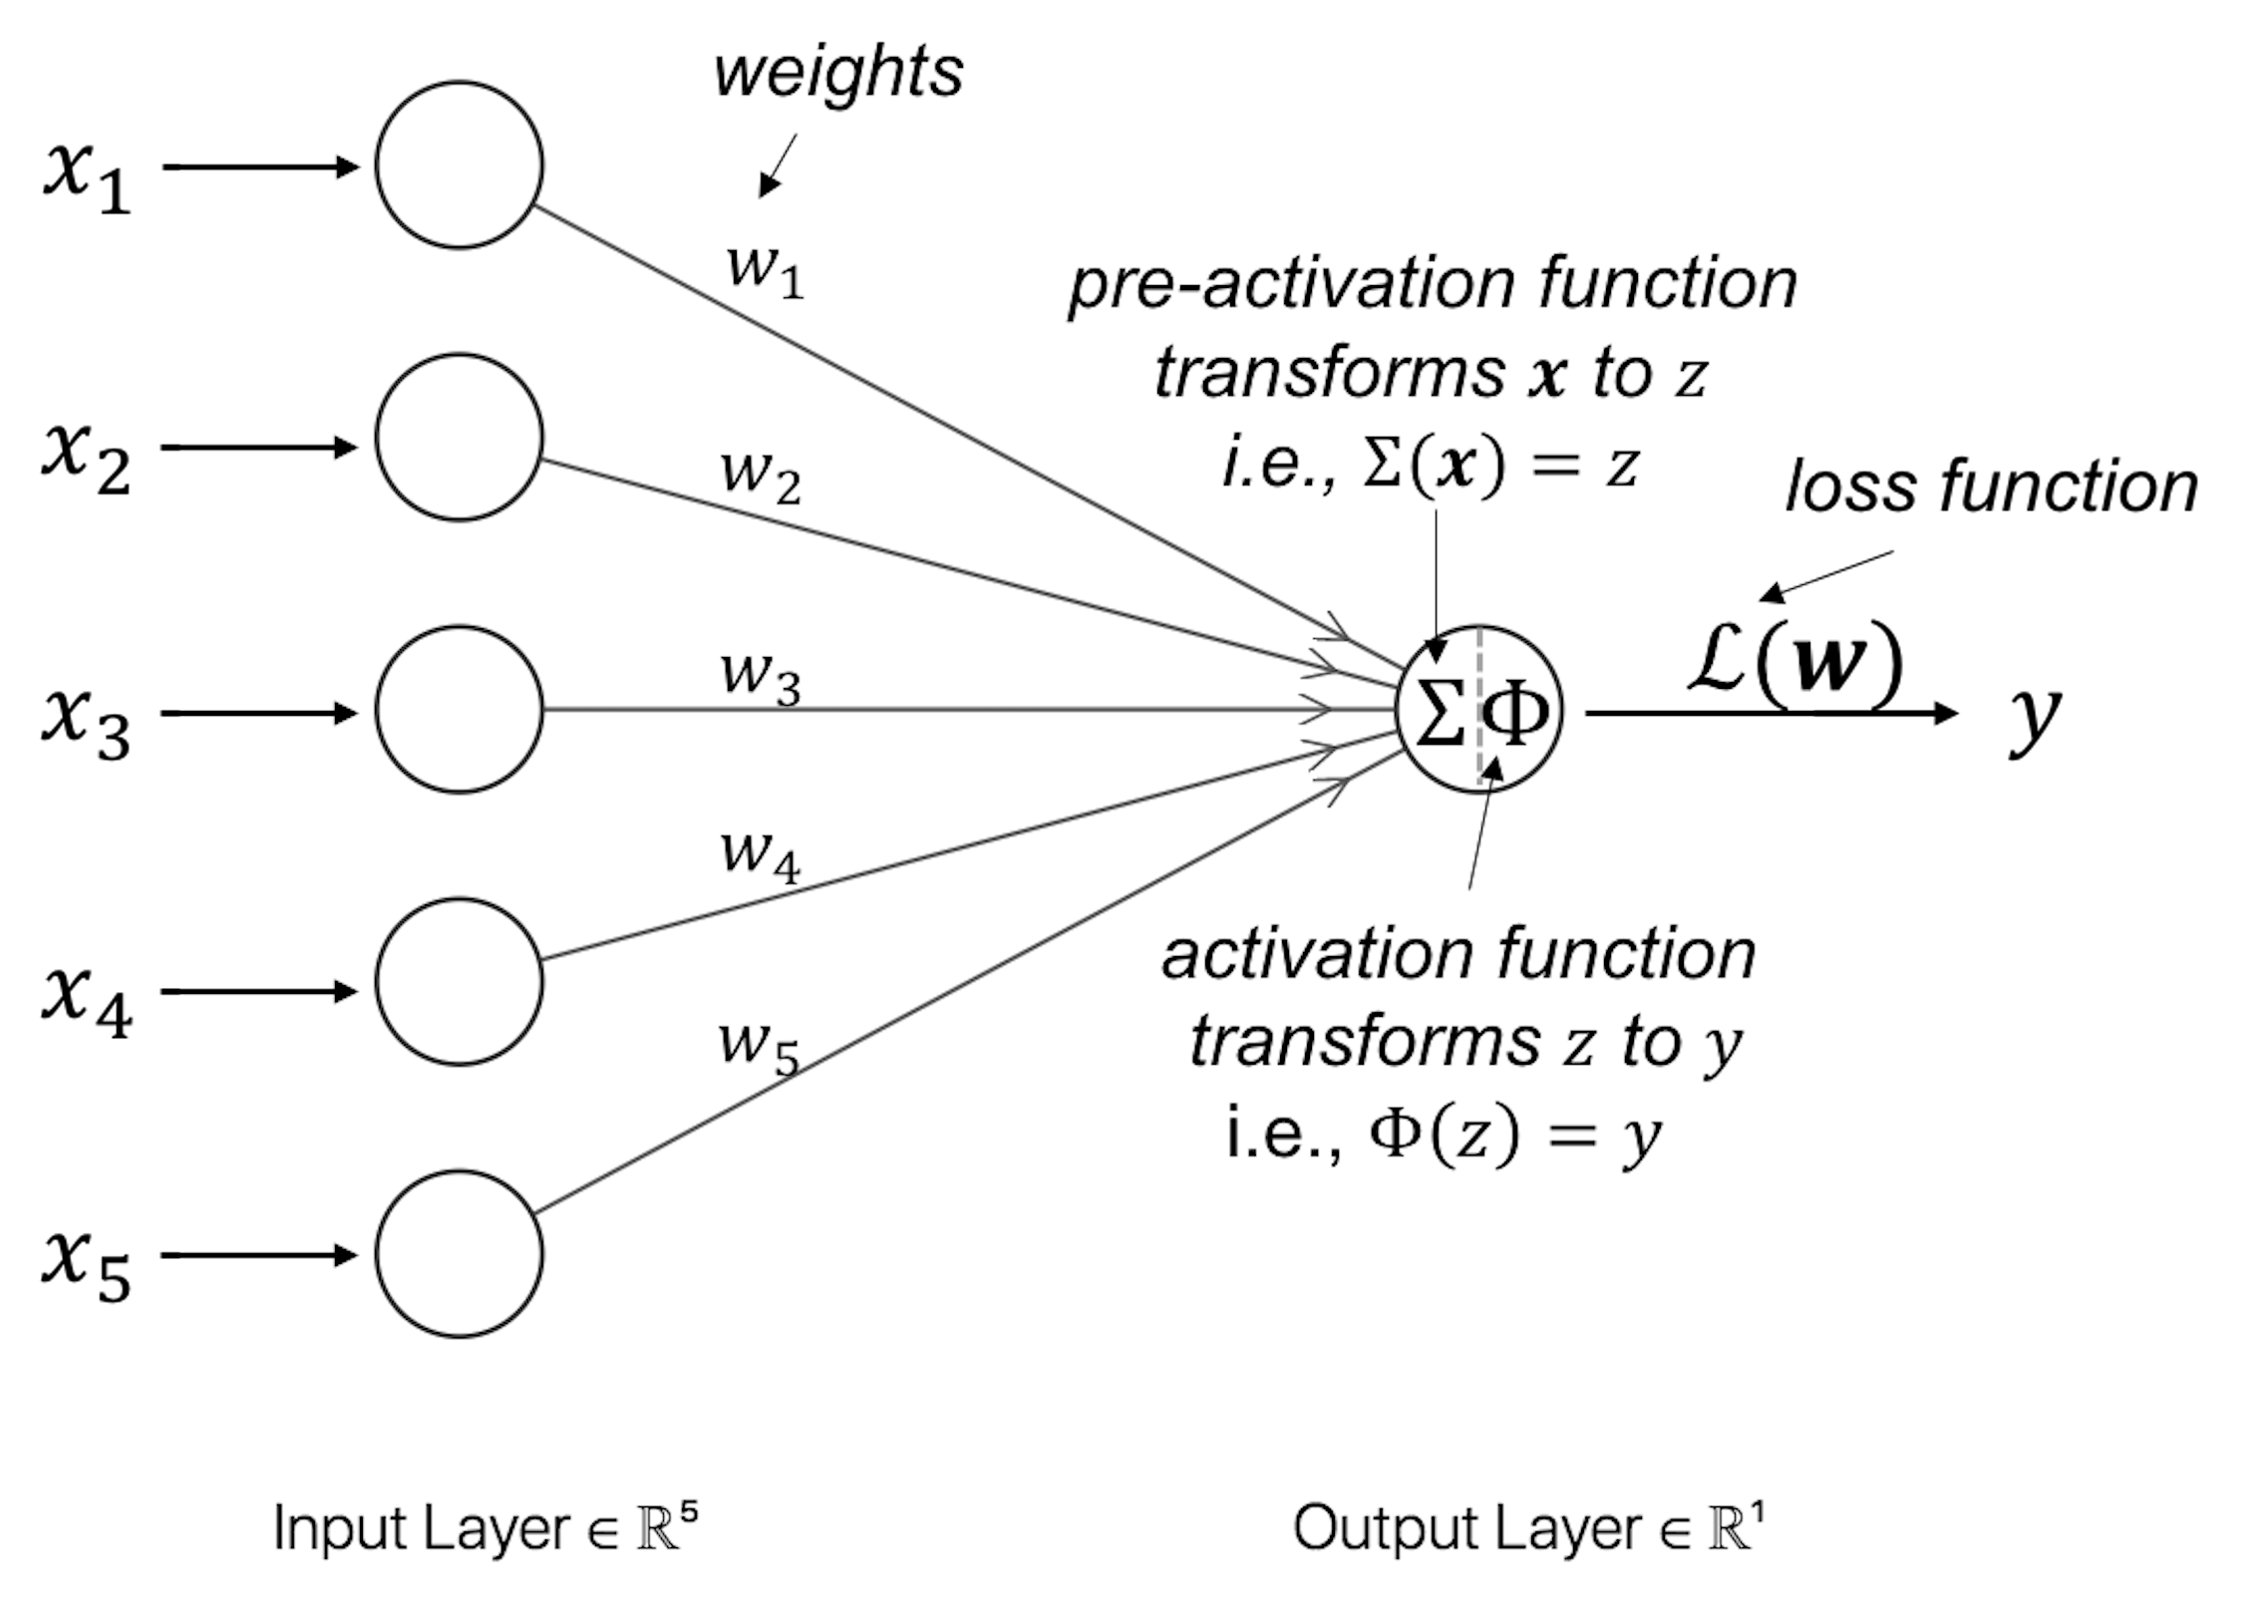 Architecture of a simple neural network model. The figure is drawn using Alex LeNail's online tool: [http://alexlenail.me/NN-SVG/index.html](http://alexlenail.me/NN-SVG/index.html).